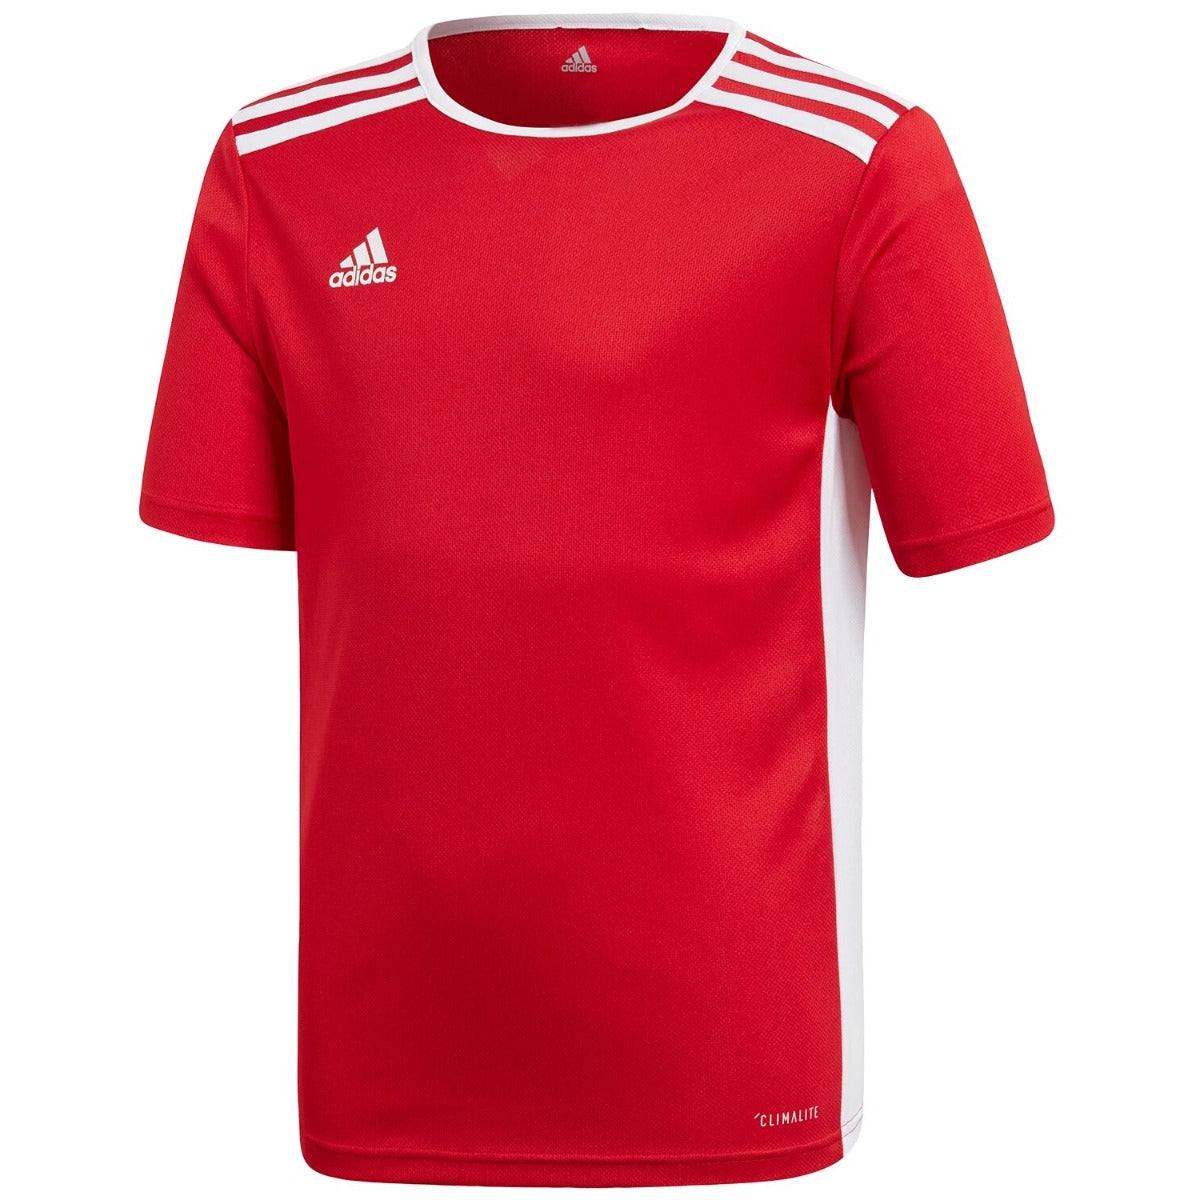 Adidas Youth Entrada 18 Jersey - Red-White (Front)